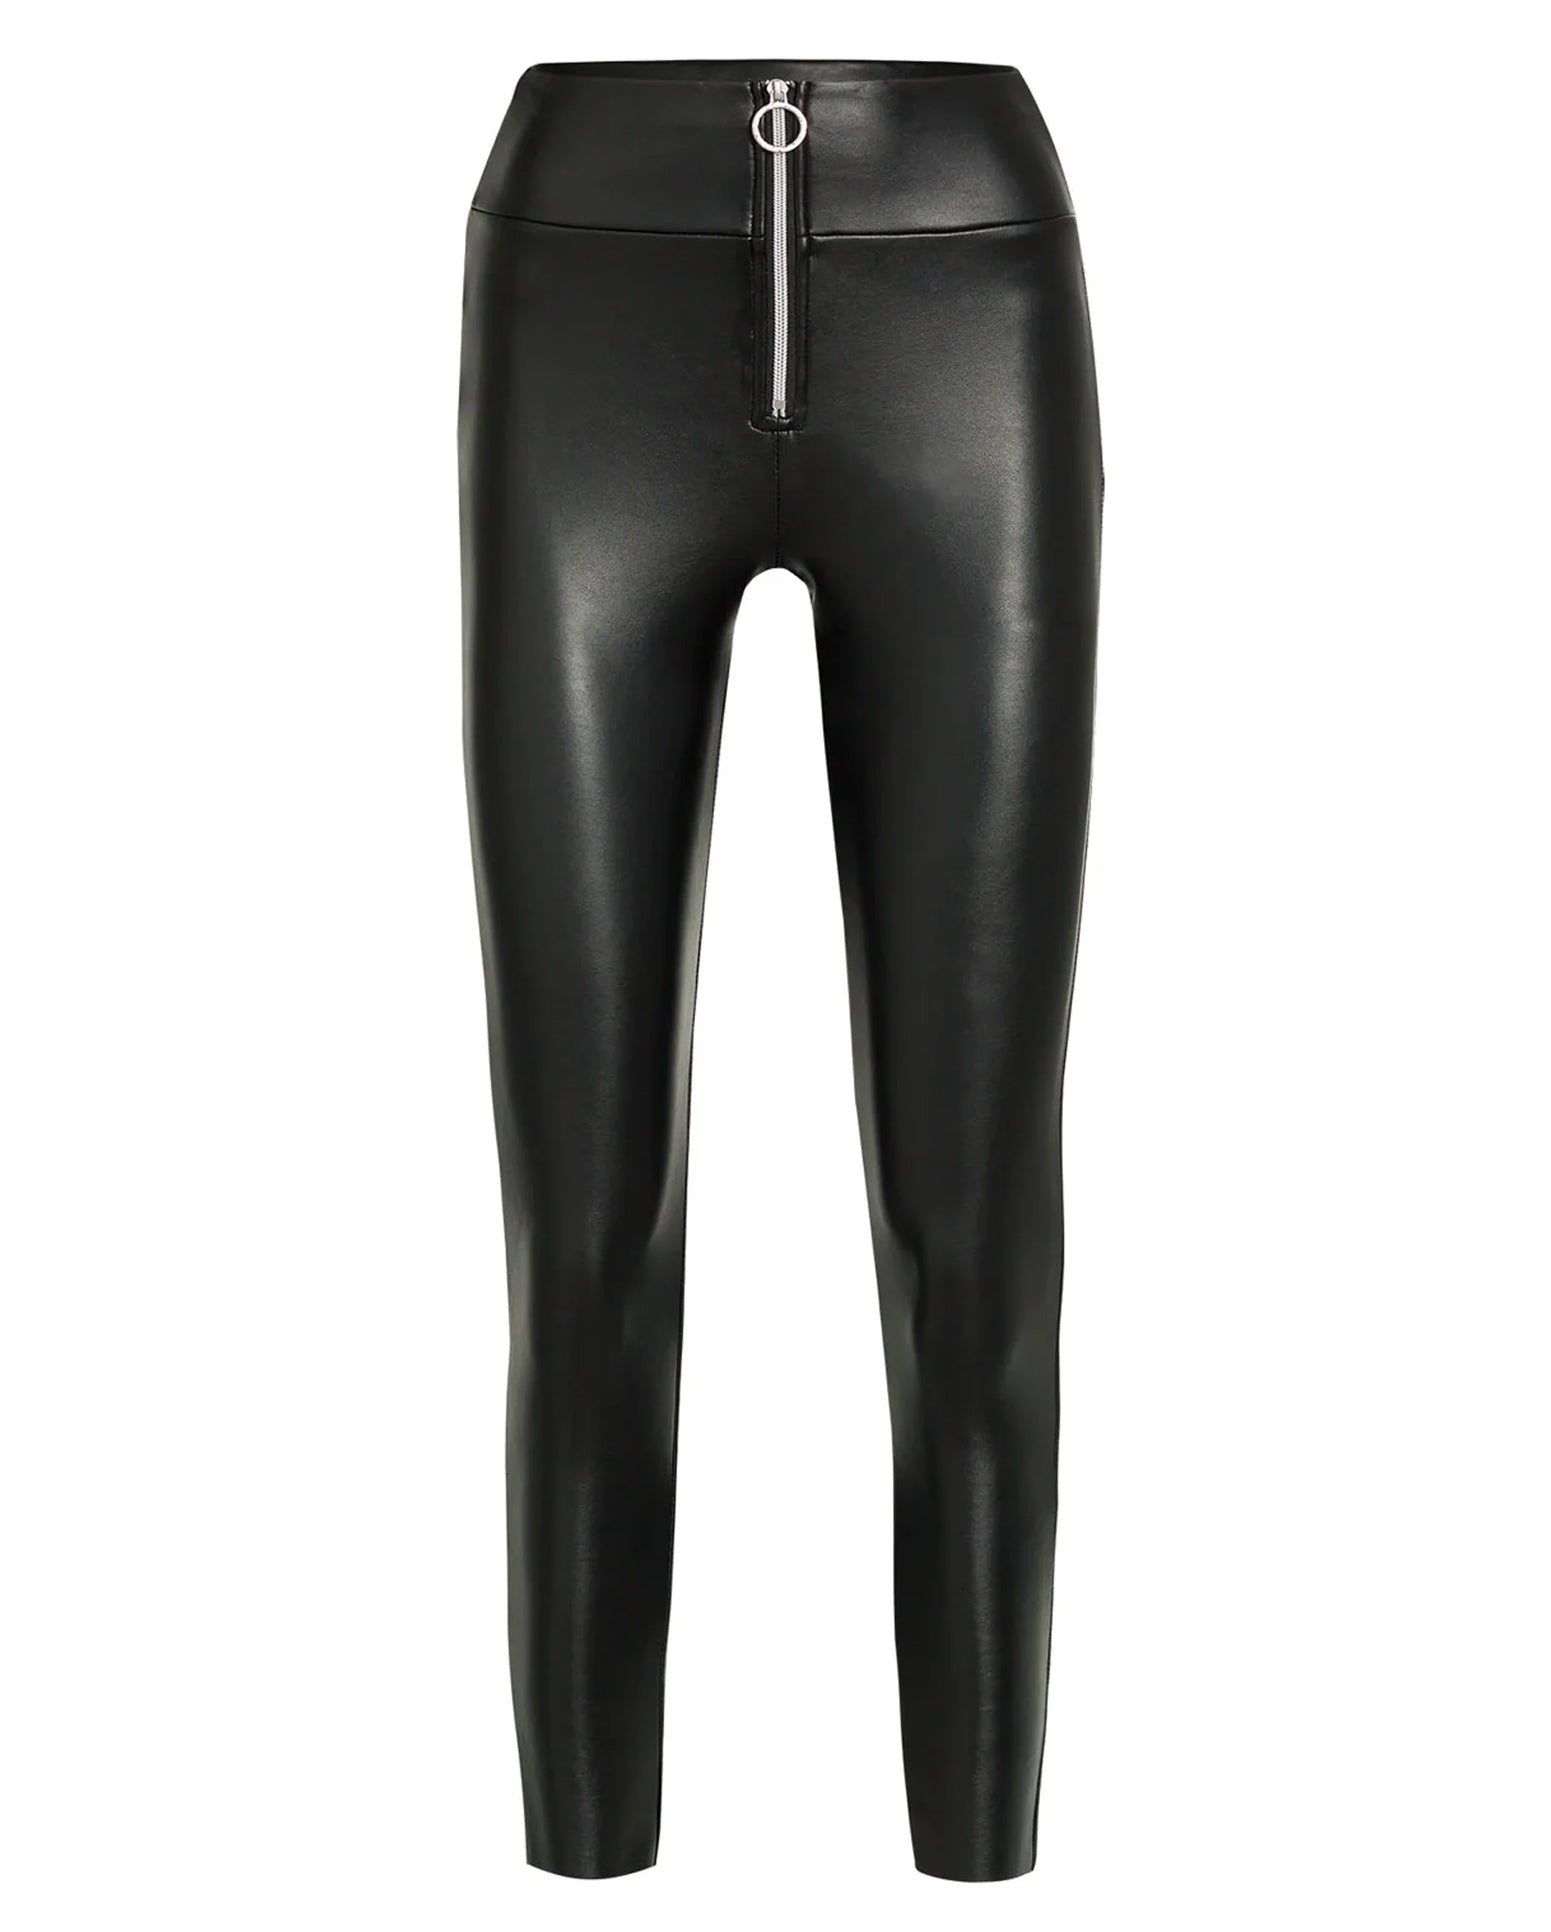 Ysabel Mora 70281 Leggings - Black high waisted faux leather fleece lined trouser leggings with zip closure, ring pull, deep waist band with darts at the back to ensure a snug fit.